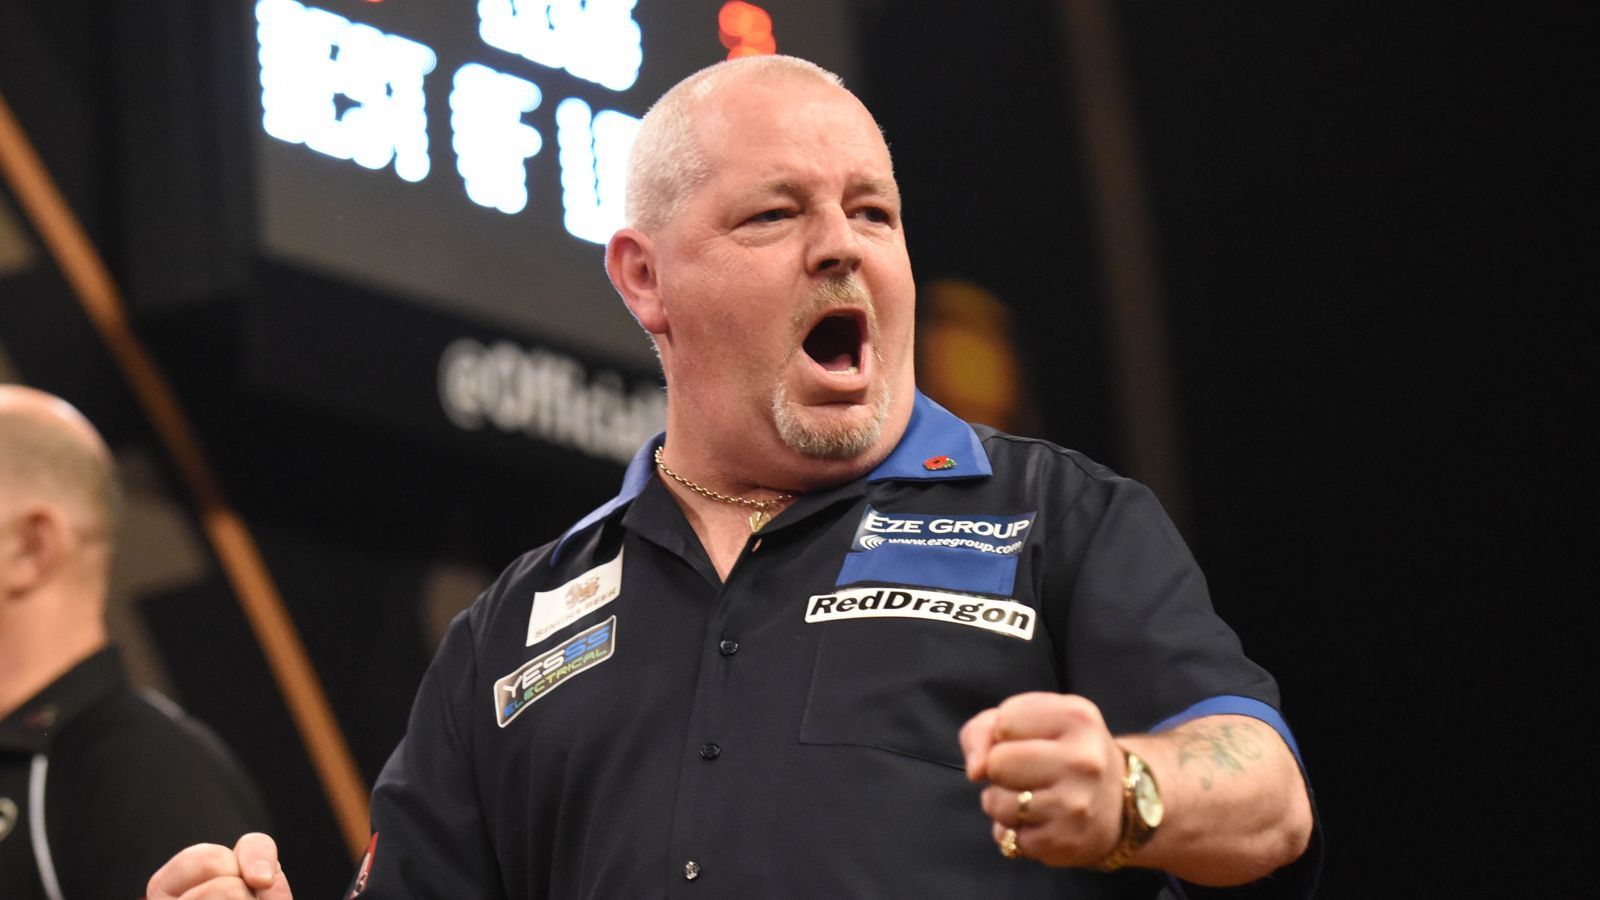 Robert Thornton vs Lee Cocks Predictions, Betting Tips & Odds │22 MARCH, 2022